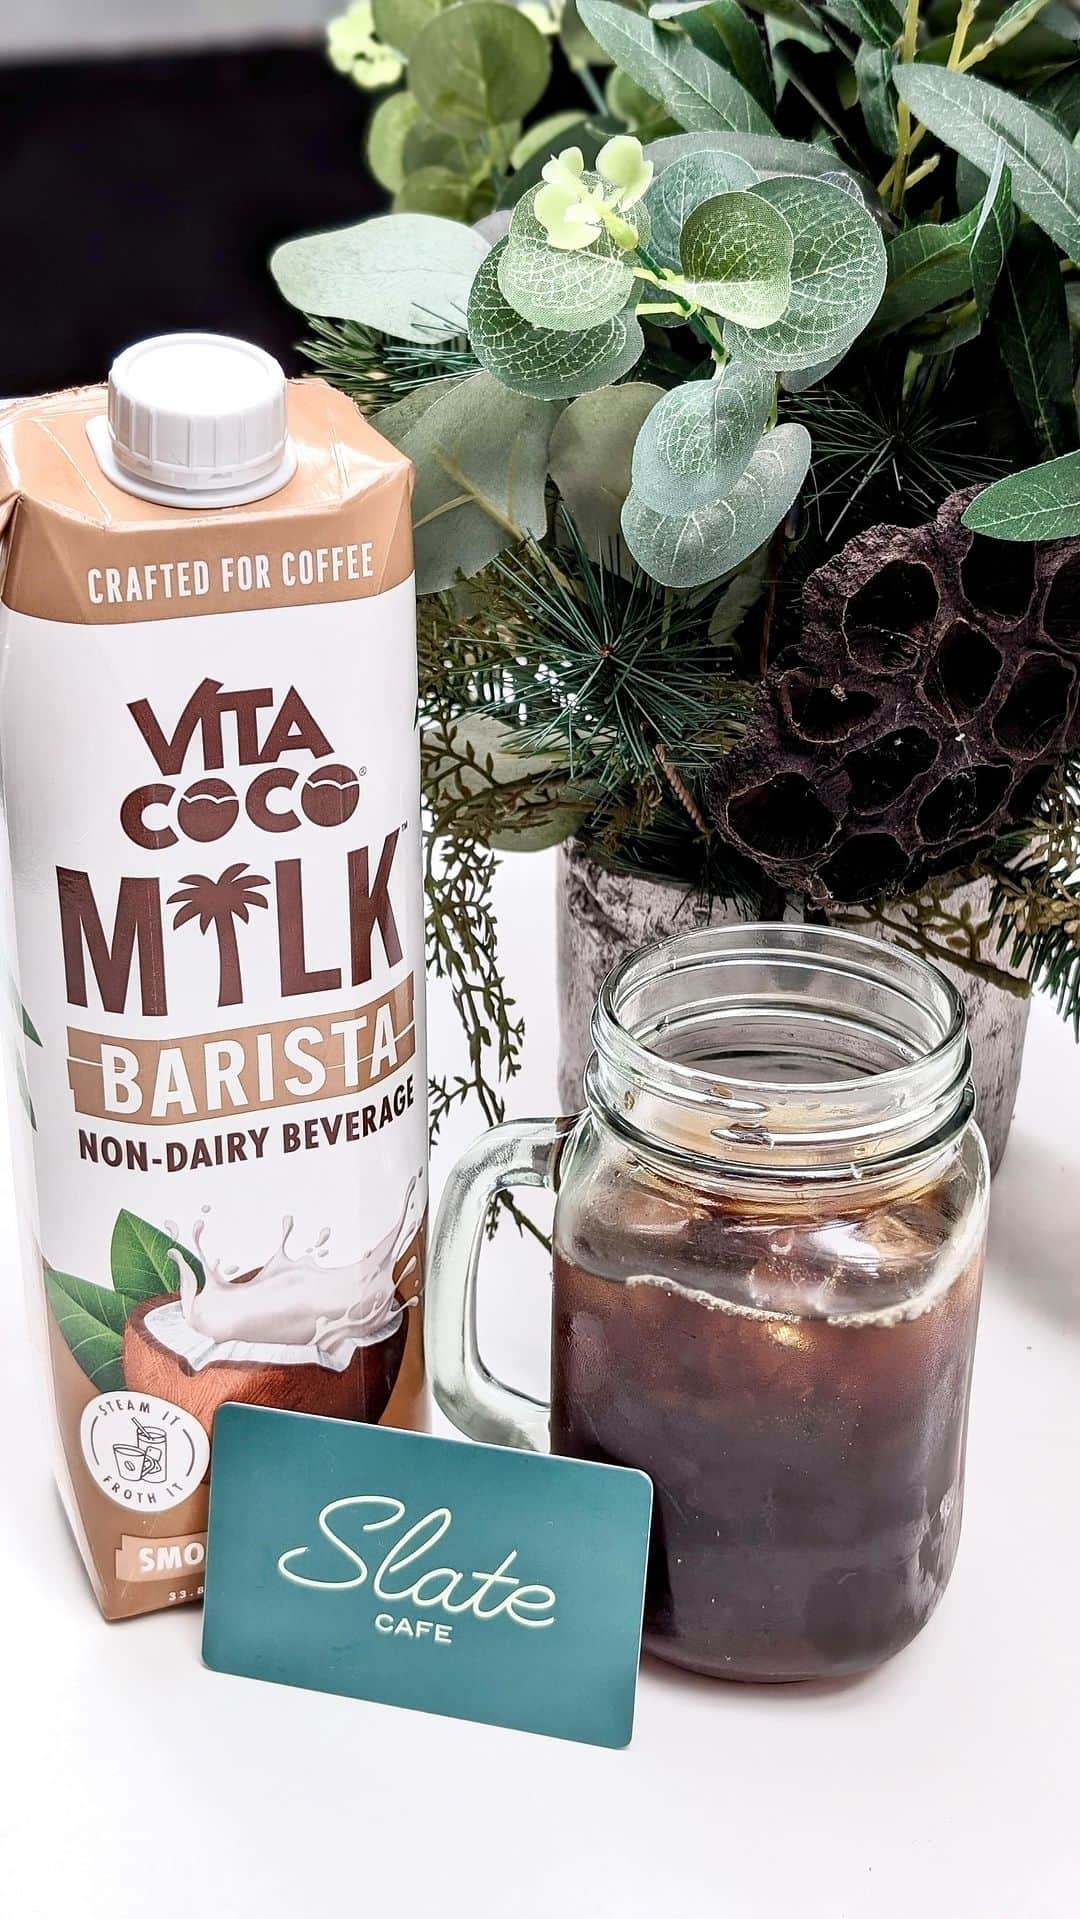 Vita Coco Coconut Waterのインスタグラム：「Day 7 of our 8 Days of Giveaways and we’re going COCO-nuts over this one...get it? 😉 Embrace your inner barista and blend @vitacoco’s luscious coconut milk with our bold cold brew for that perfect sip. Ready to elevate your morning ritual?  🎉 Steps to caffeination elation: 1. Follow the brew crew: @slatecafenyc & @vitacoco  2. Double tap if you’re nutty for a little coconut milk in your cold brew 3. Tag your coffee clique   Blend, sip, repeat, and keep the vibes alive all year round! 🥥☕  #BrewedToPerfection #NYCCoffee #SlateCafe #SlateCafeNYC #CoffeeLoversNYC #NYCCoffee #CoffeeAddict #BreakfastGoals #BreakfastInNYC #NYCBreakfast #FoodieNYC #NomadEats #MidtownNYC #NYCfood #NYCRestaurants #EatingNYC #InstaFoodNYC #TasteOfNYC #EatLocalNYC #FoodiesofNYC #NYCFoodGuide #FoodstagramNYC #HungryNYC #GoodEatsNYC #TastingNYC #EatingOutNYC #BrewYorkCity #vitacoco #coconutmilk」